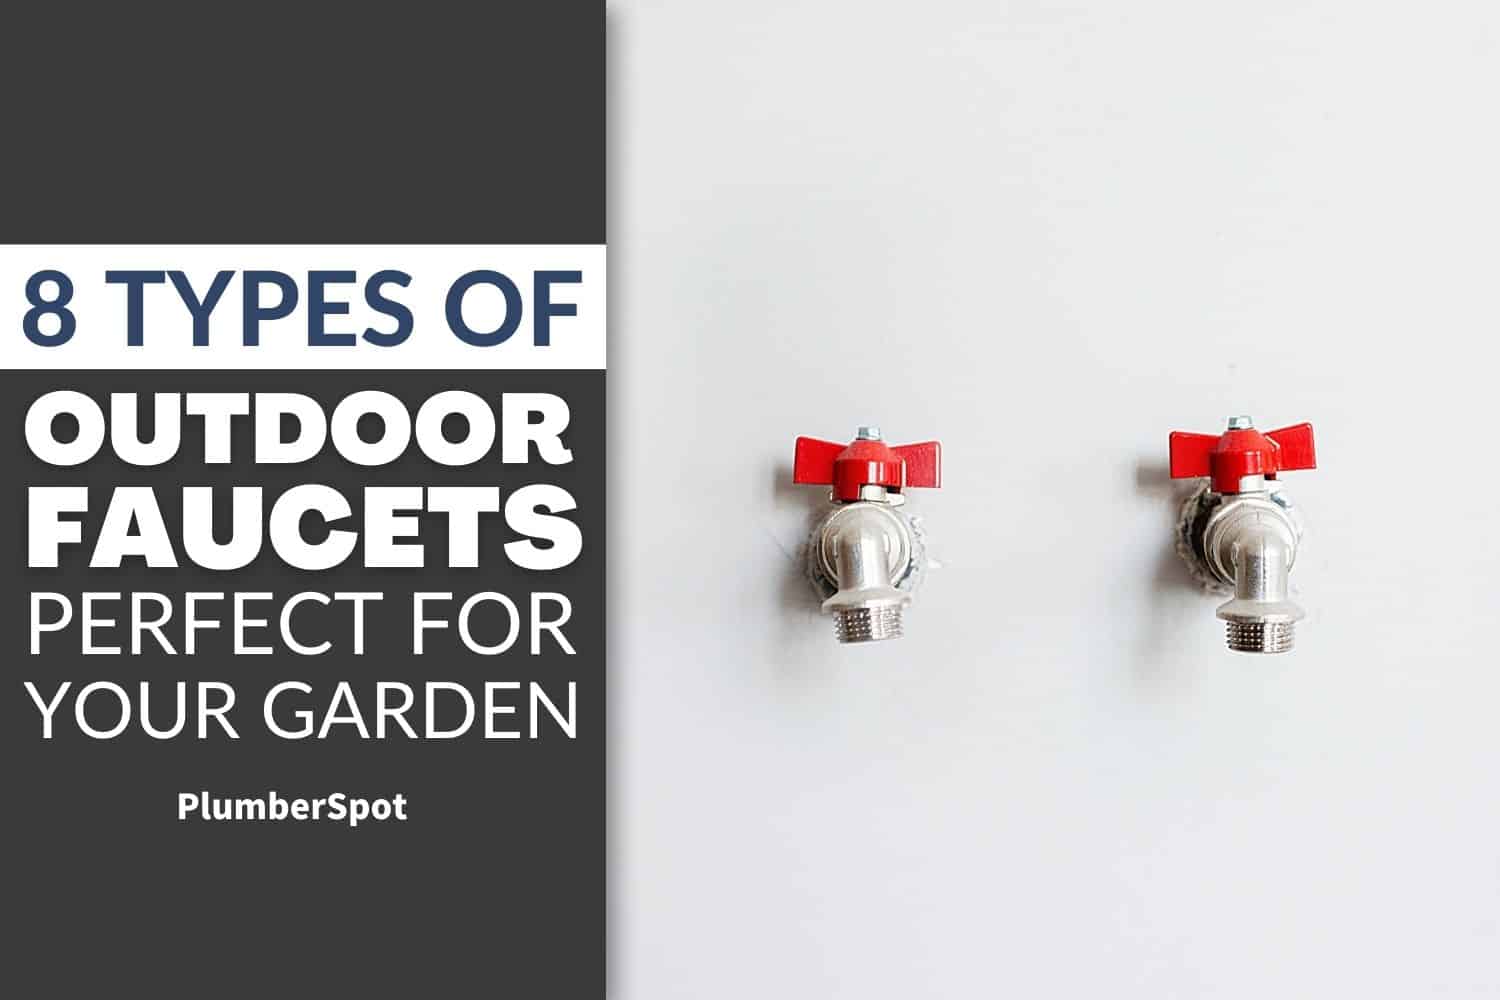 types of outdoor faucet